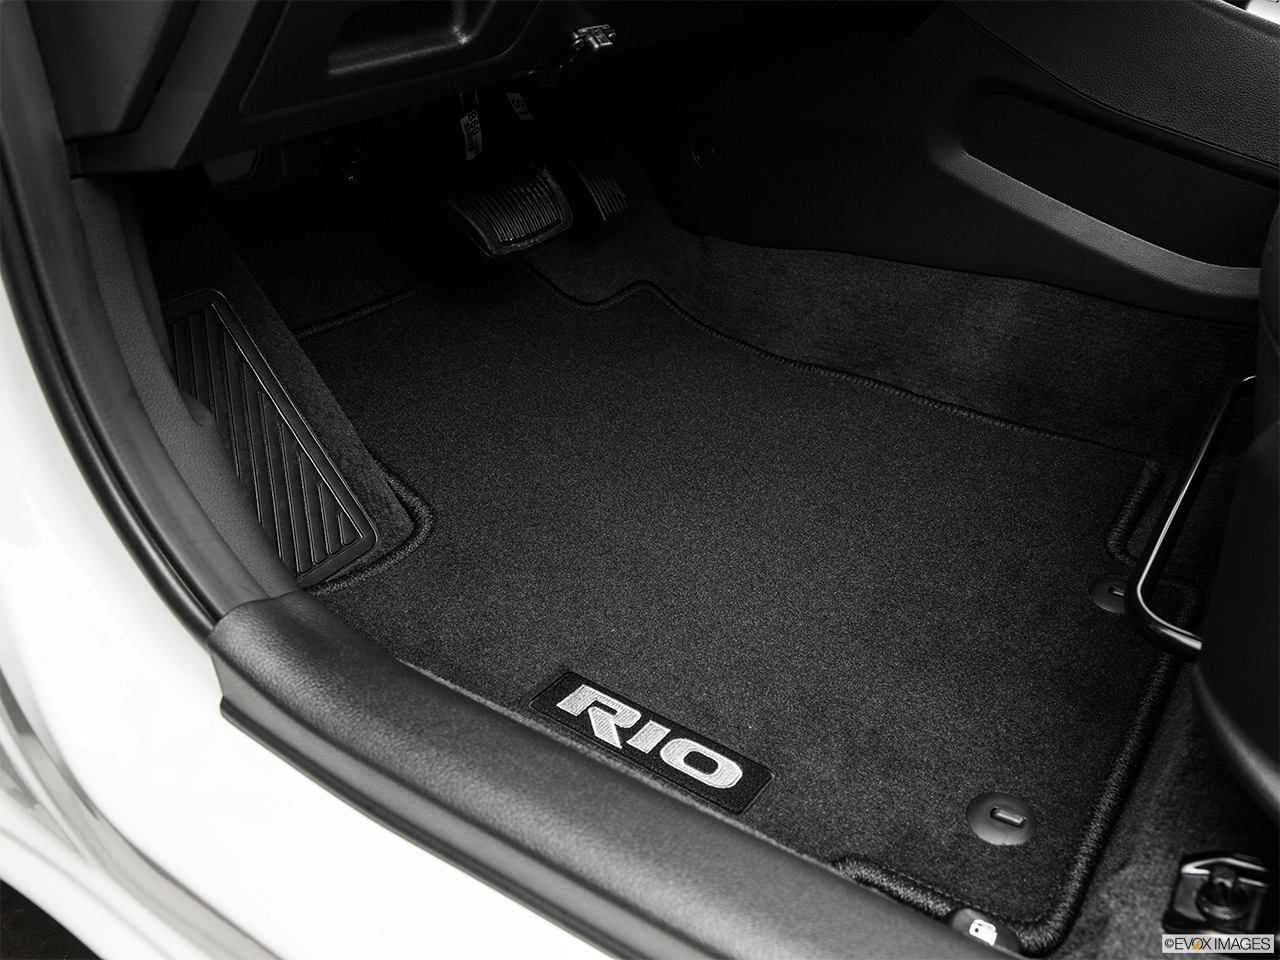 2017 Kia Rio 5-door LX Driver's floor mat and pedals. Mid-seat level from outside looking in. 